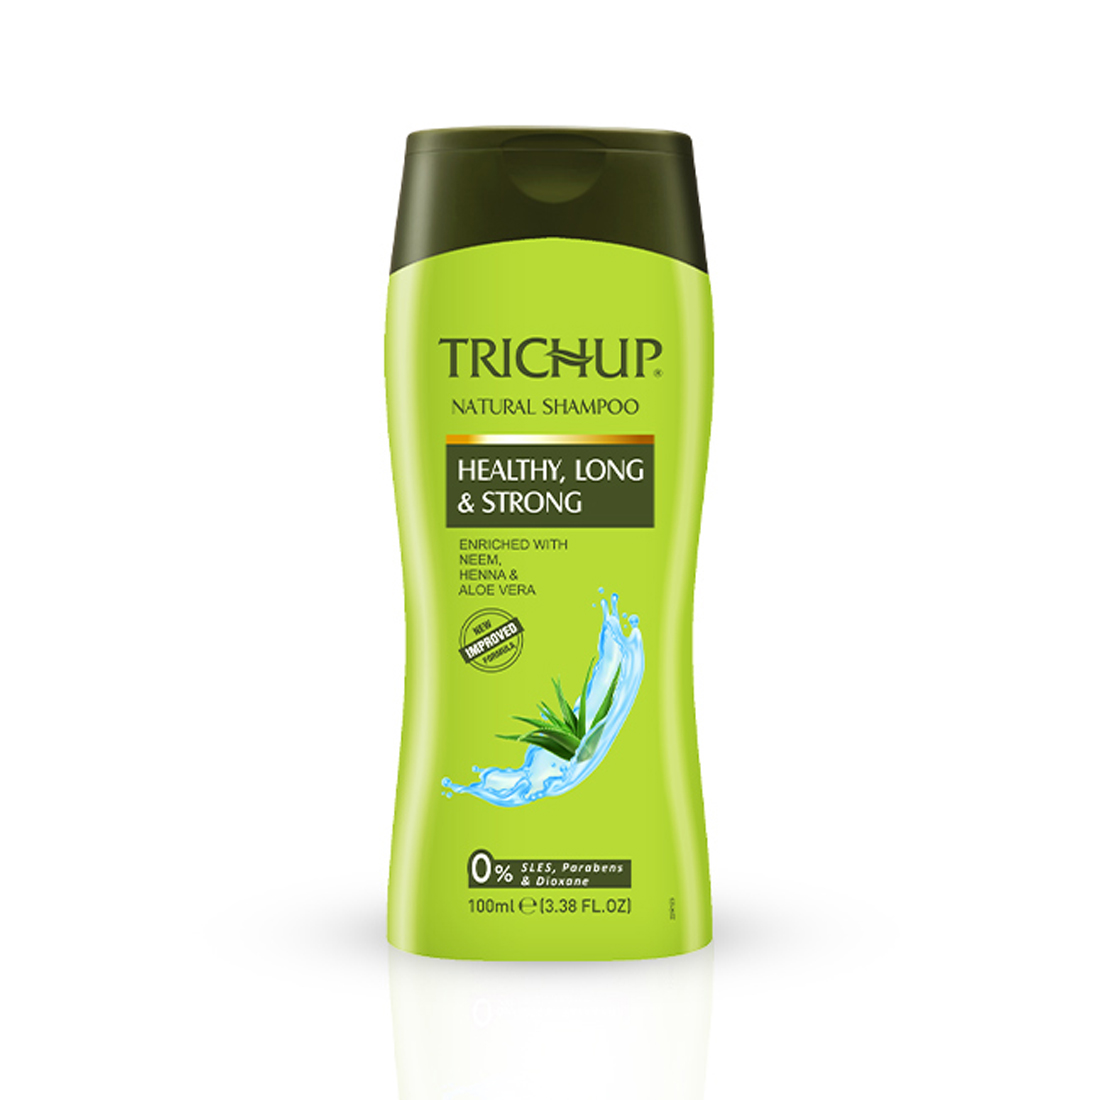 Buy Vasu Trichup Healthy, Long & Strong Shampoo at Best Price Online